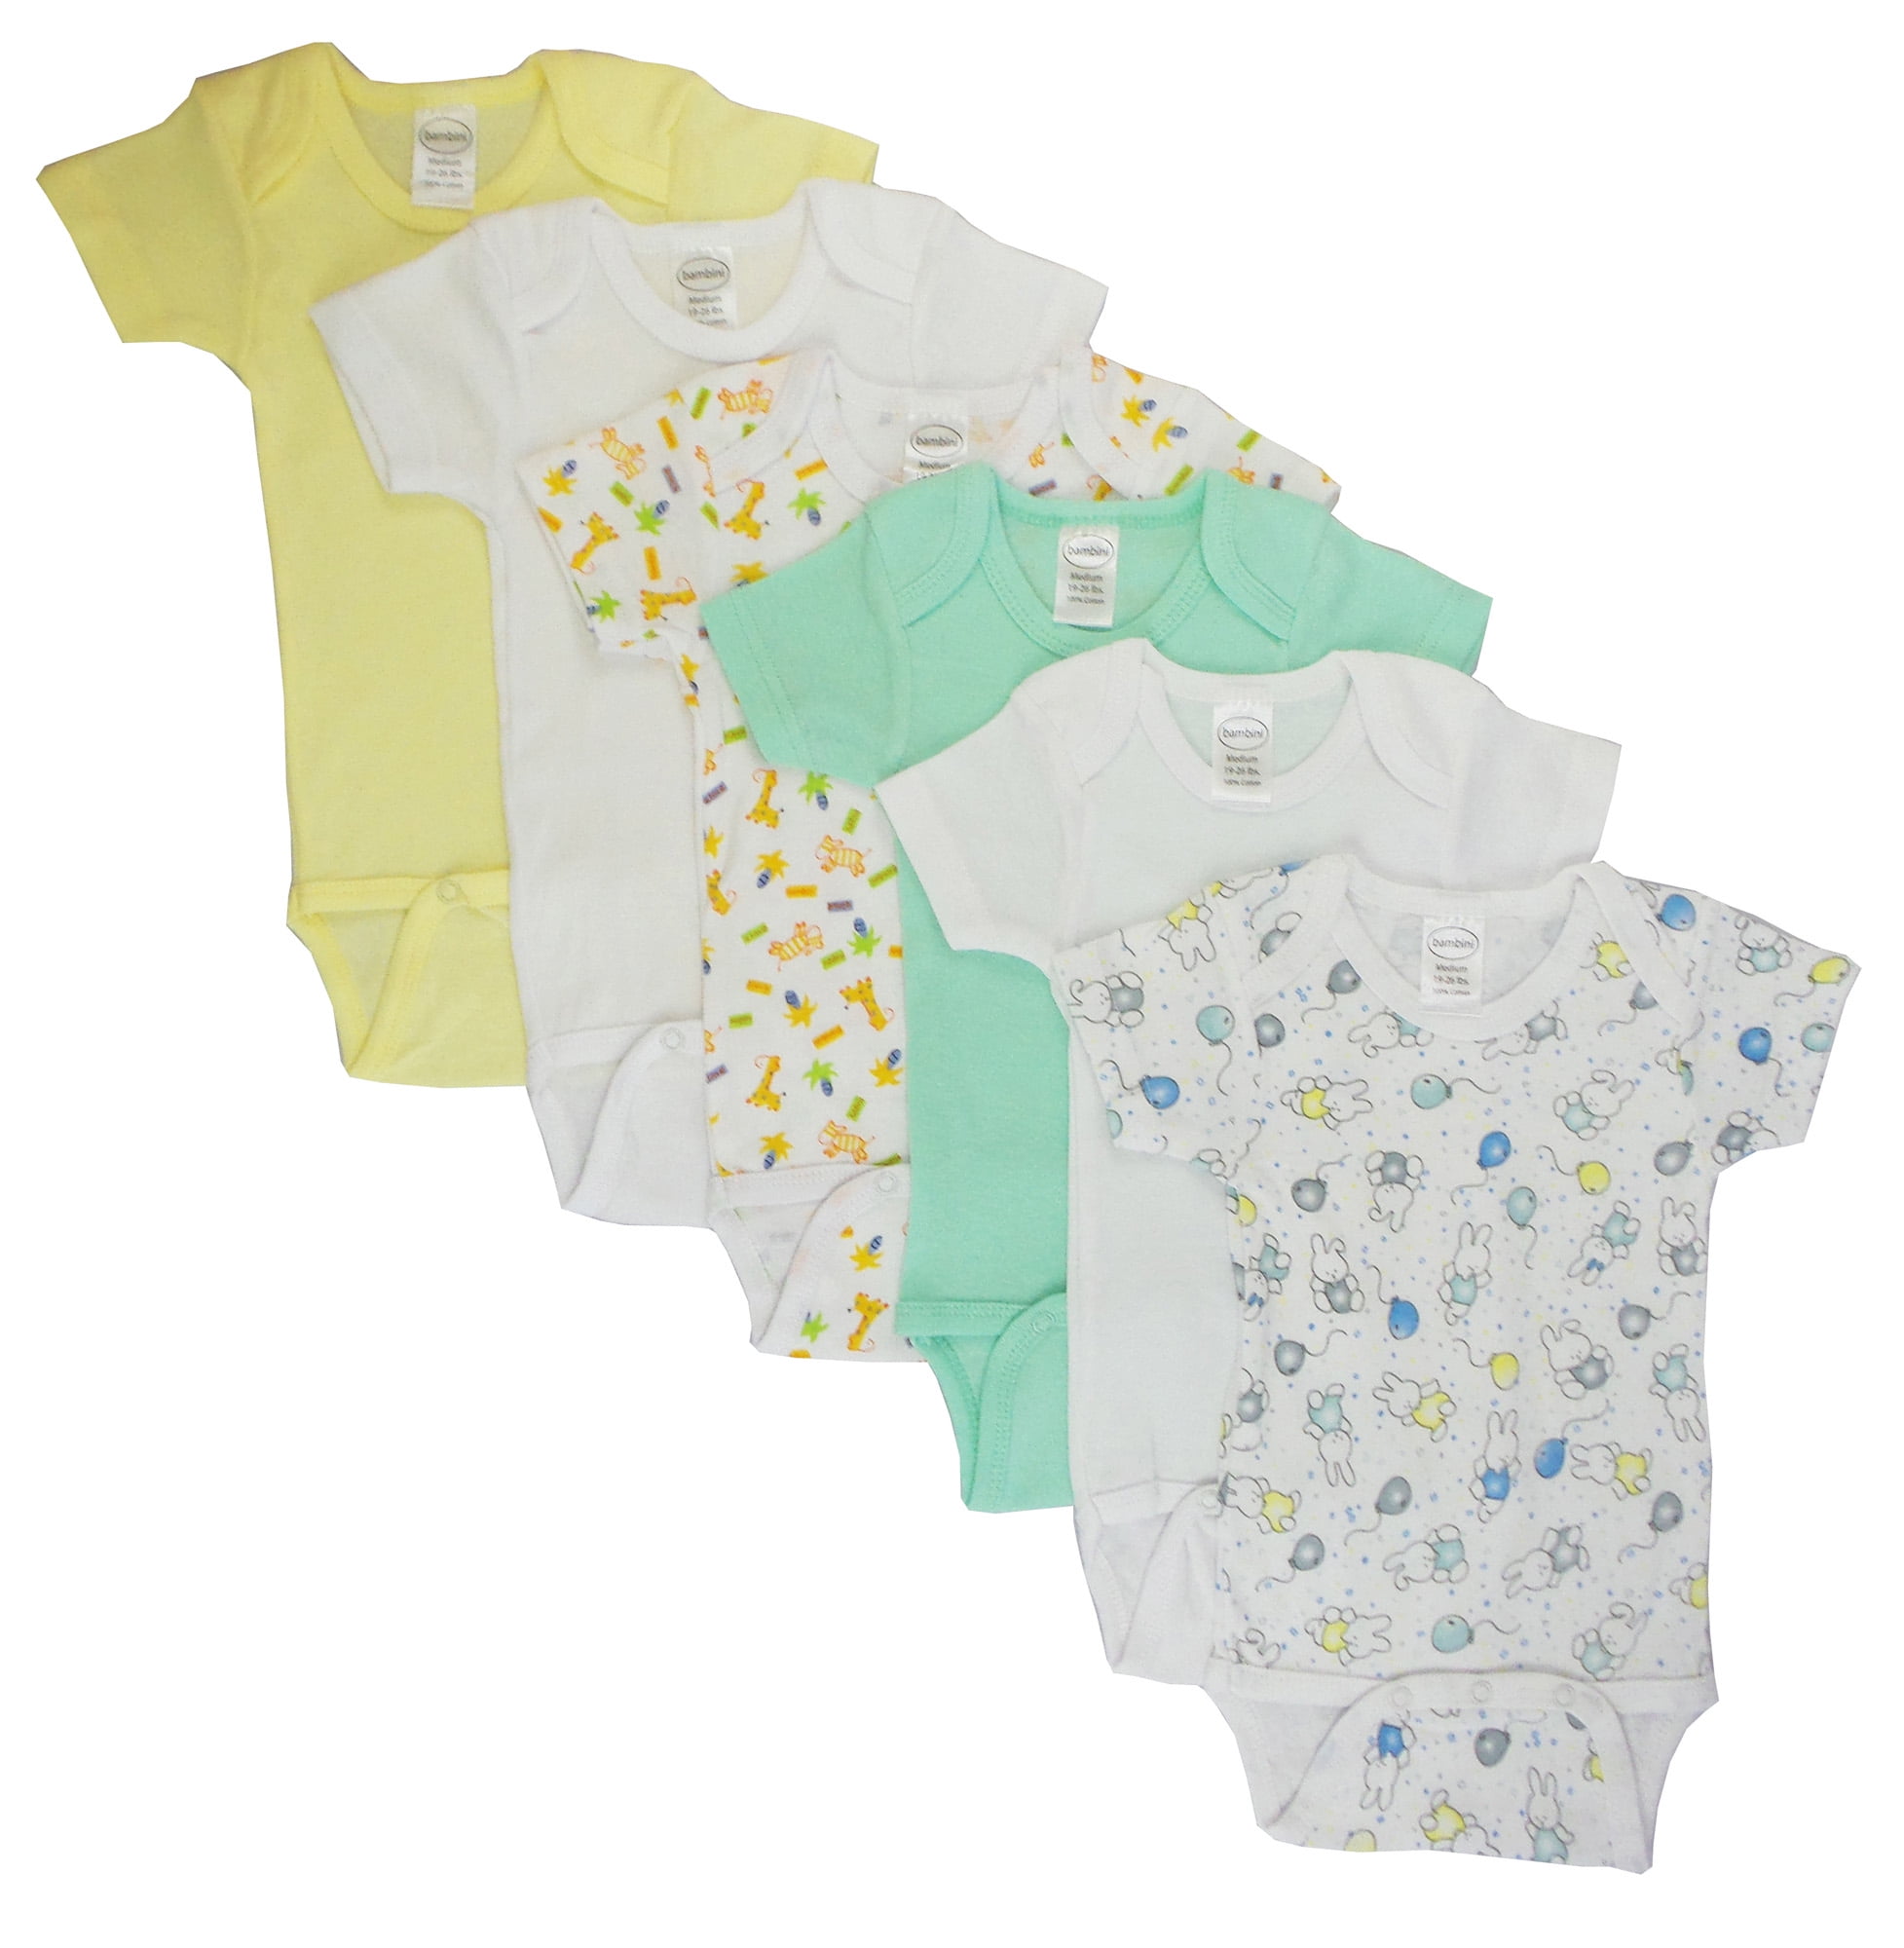 Cs-004s-005s Boys Short Sleeve With Printed, Assorted - Small